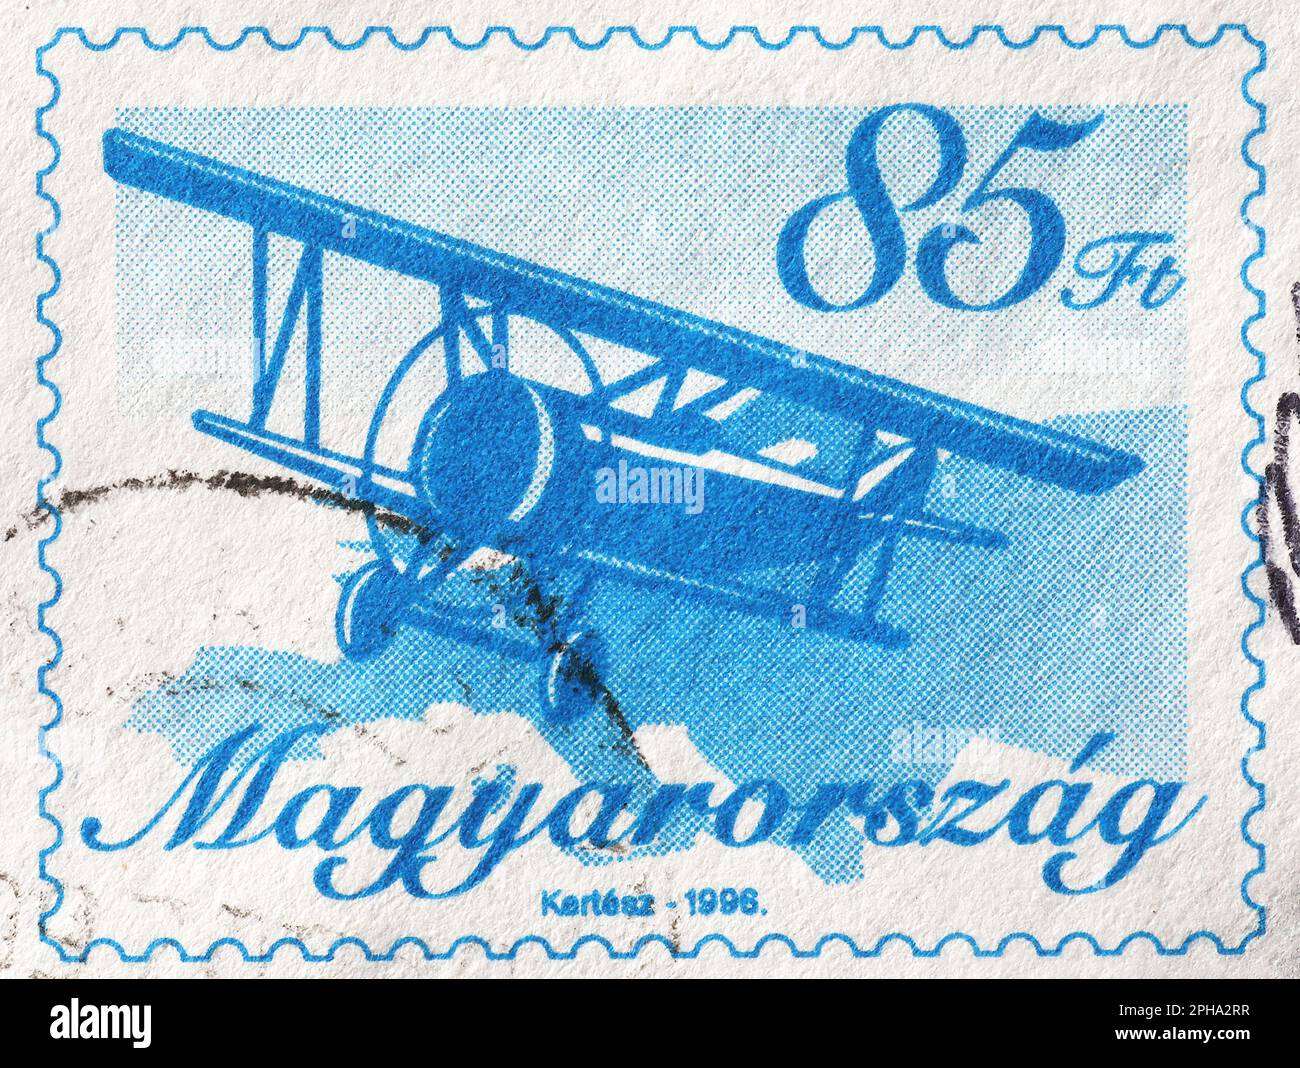 Biplane in flight on hungarian postage stamp Stock Photo